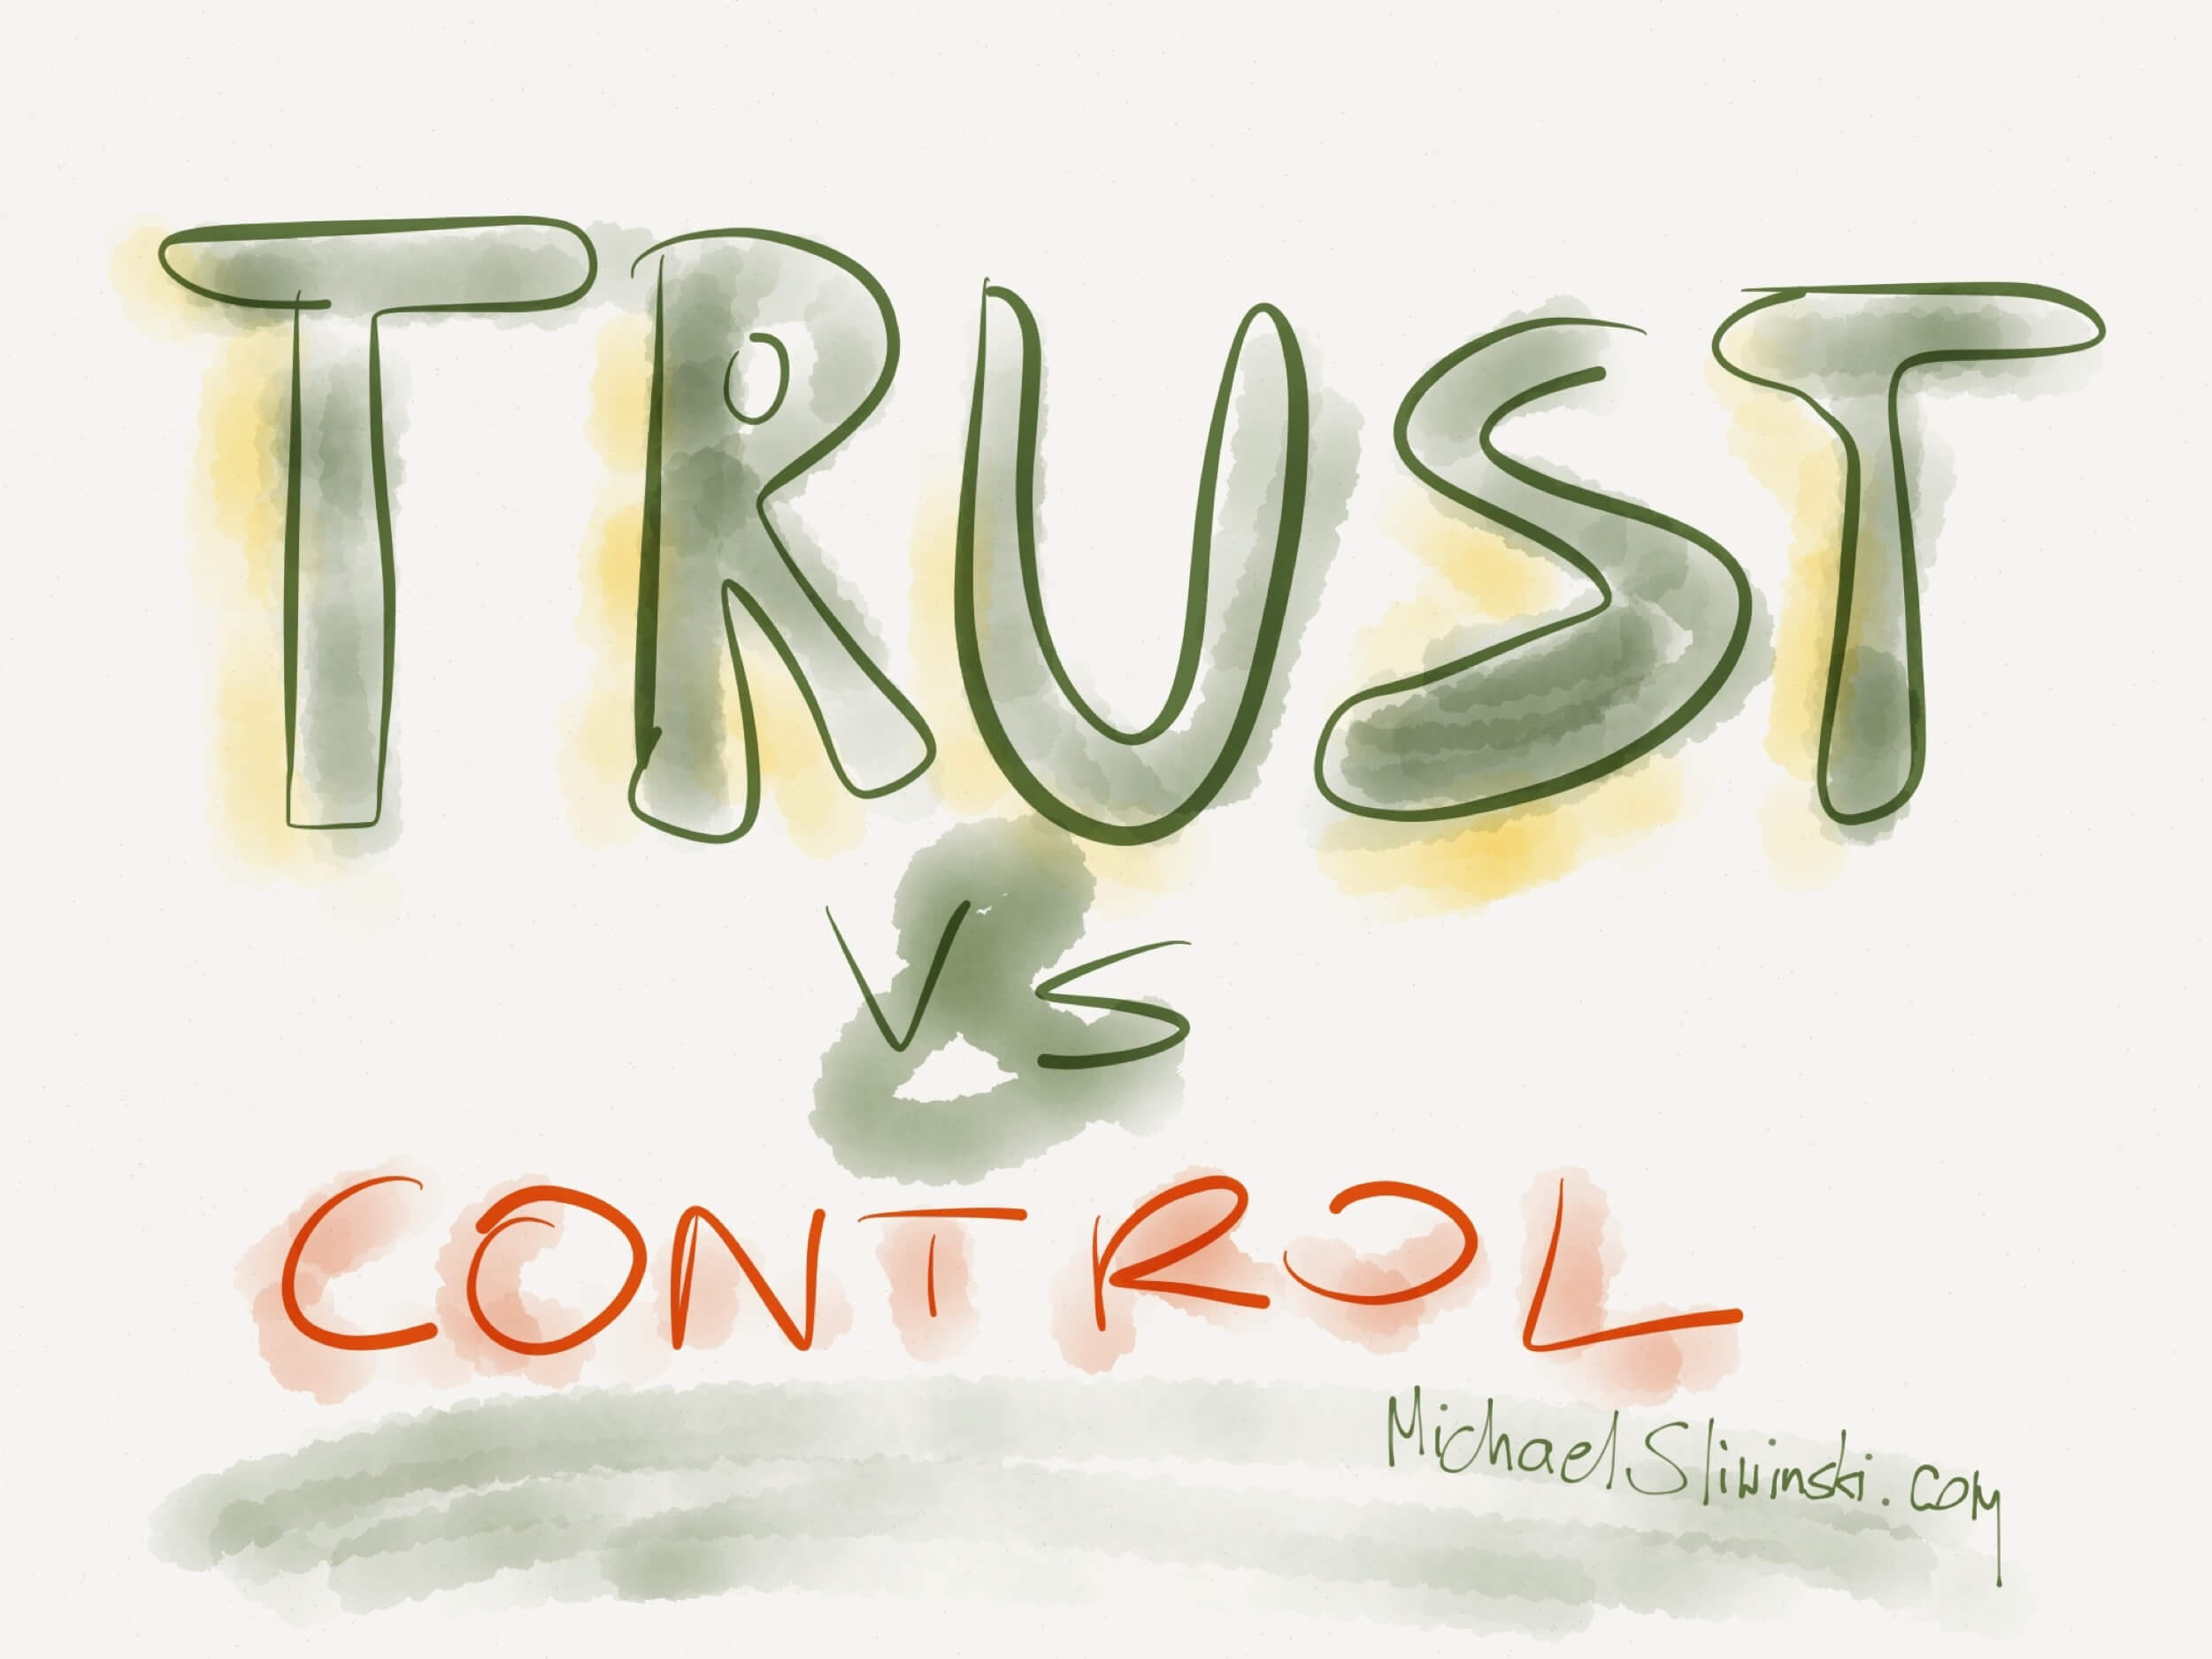 Control is good but trust is better